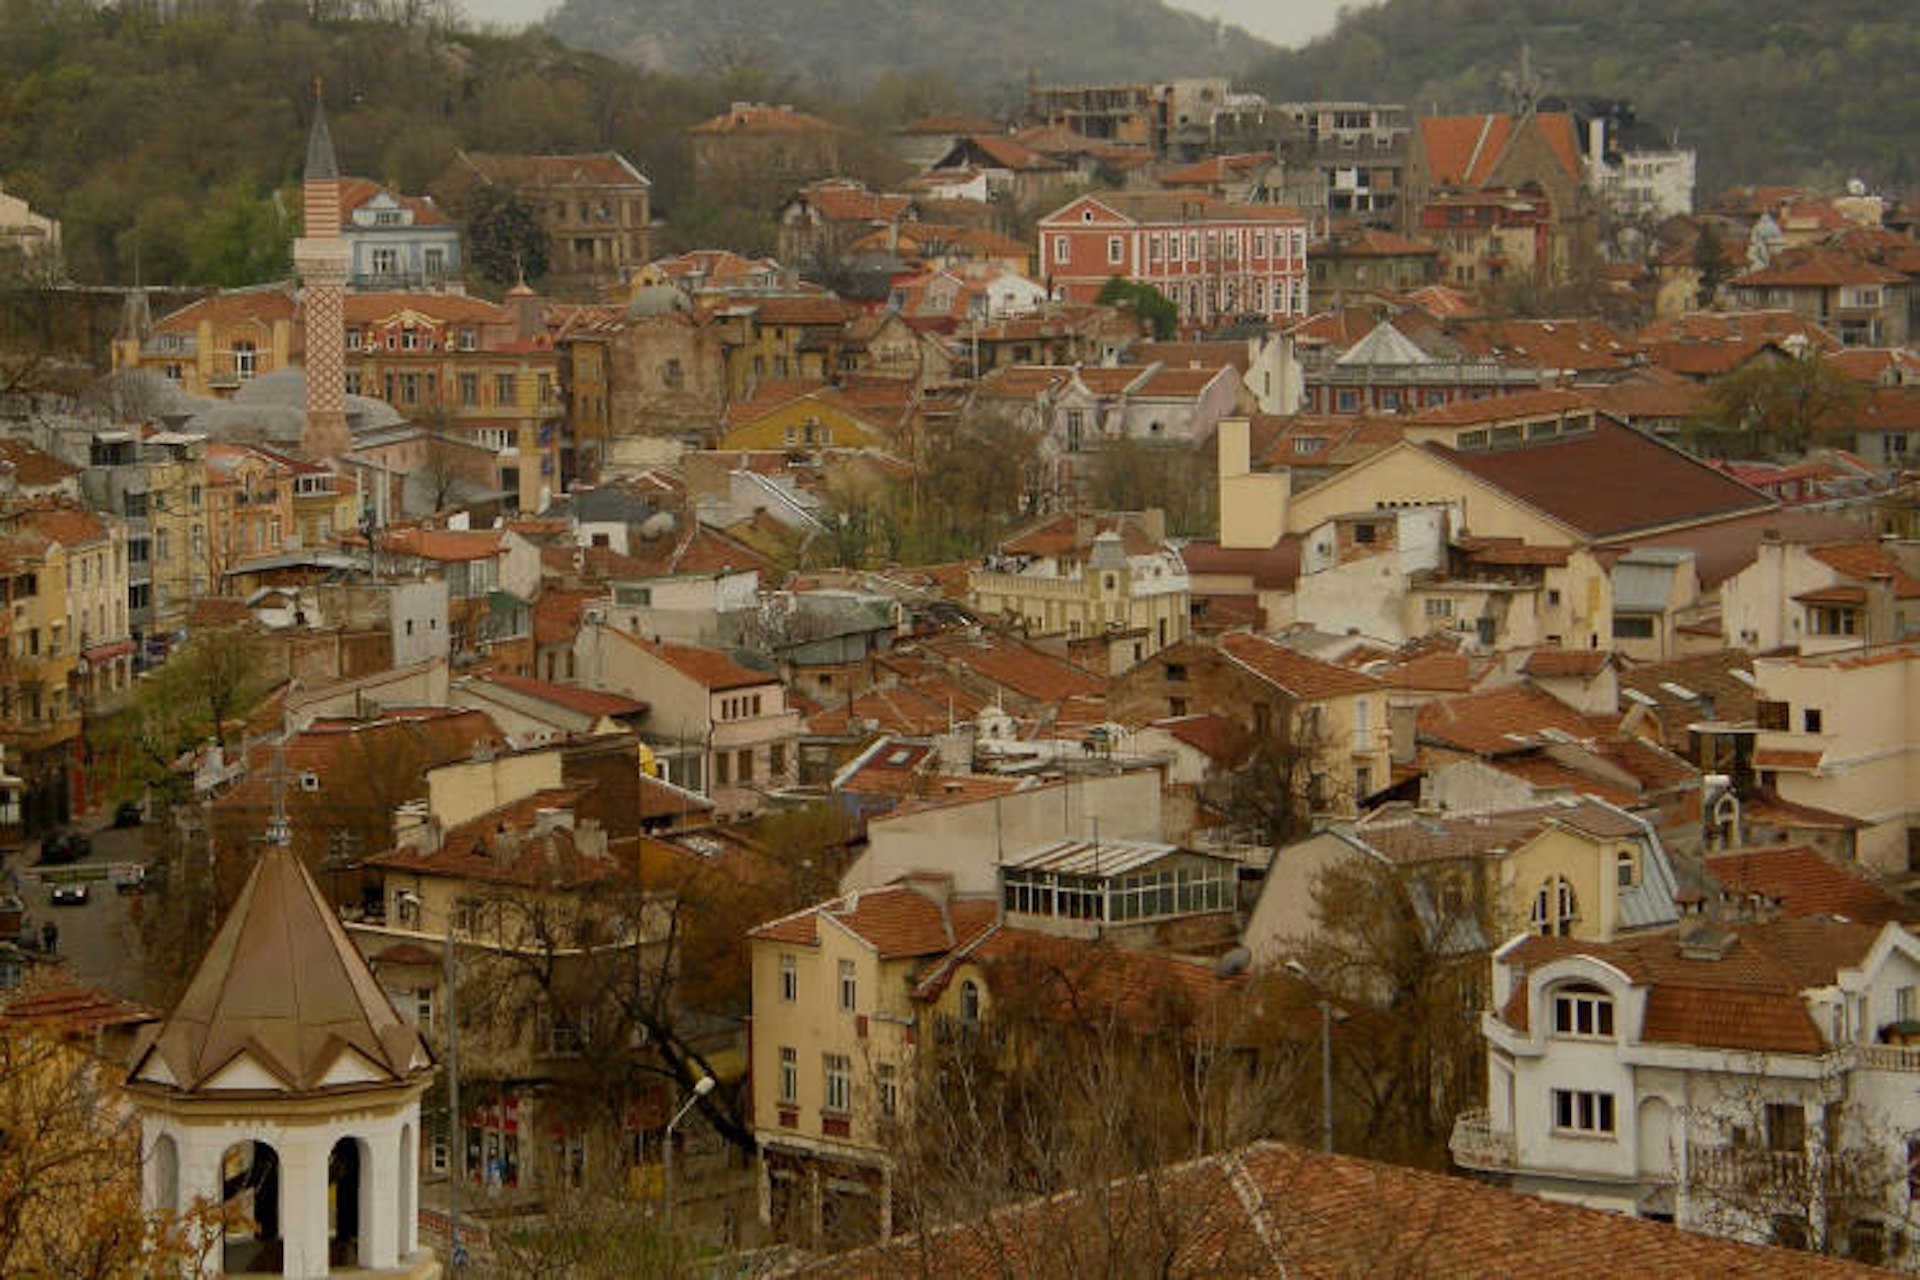 The rooftops of old Plovdiv. Image by Klearchos Kapoutsis / CC BY 2.0